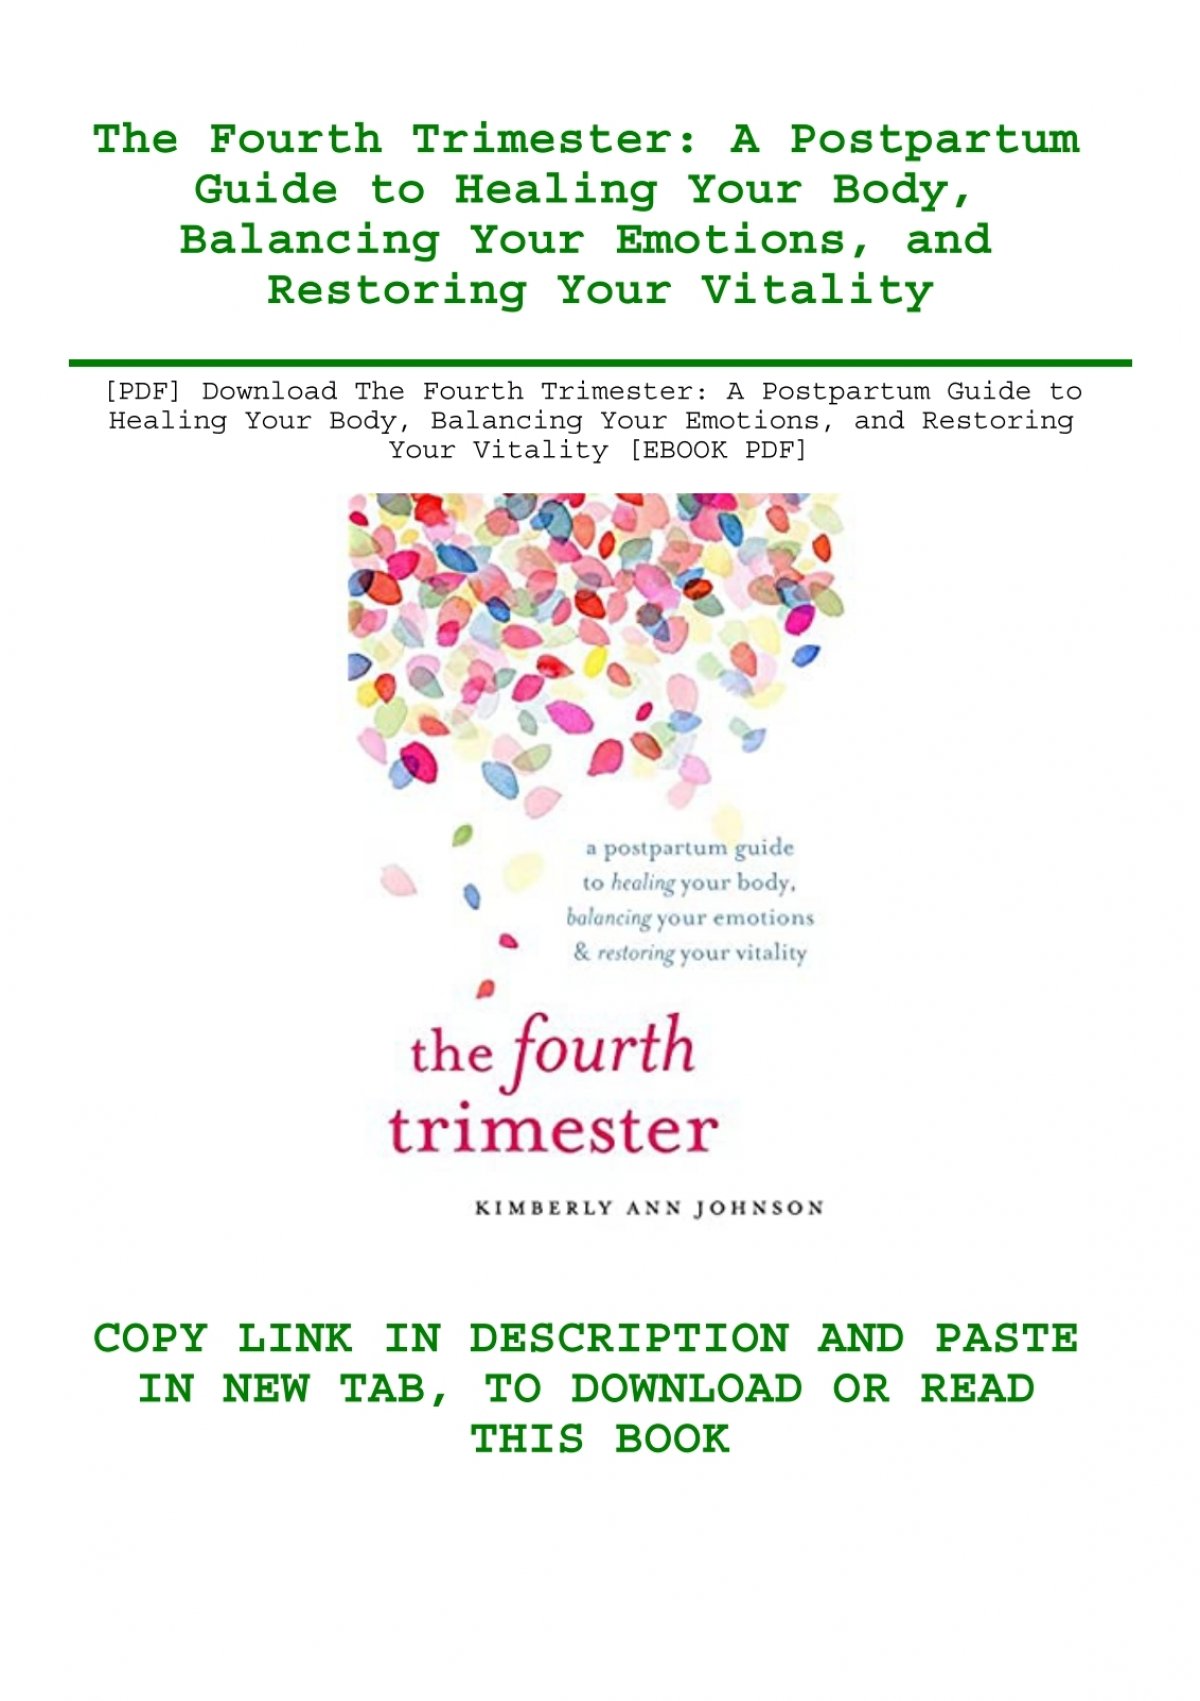 The Fourth Trimester Guide